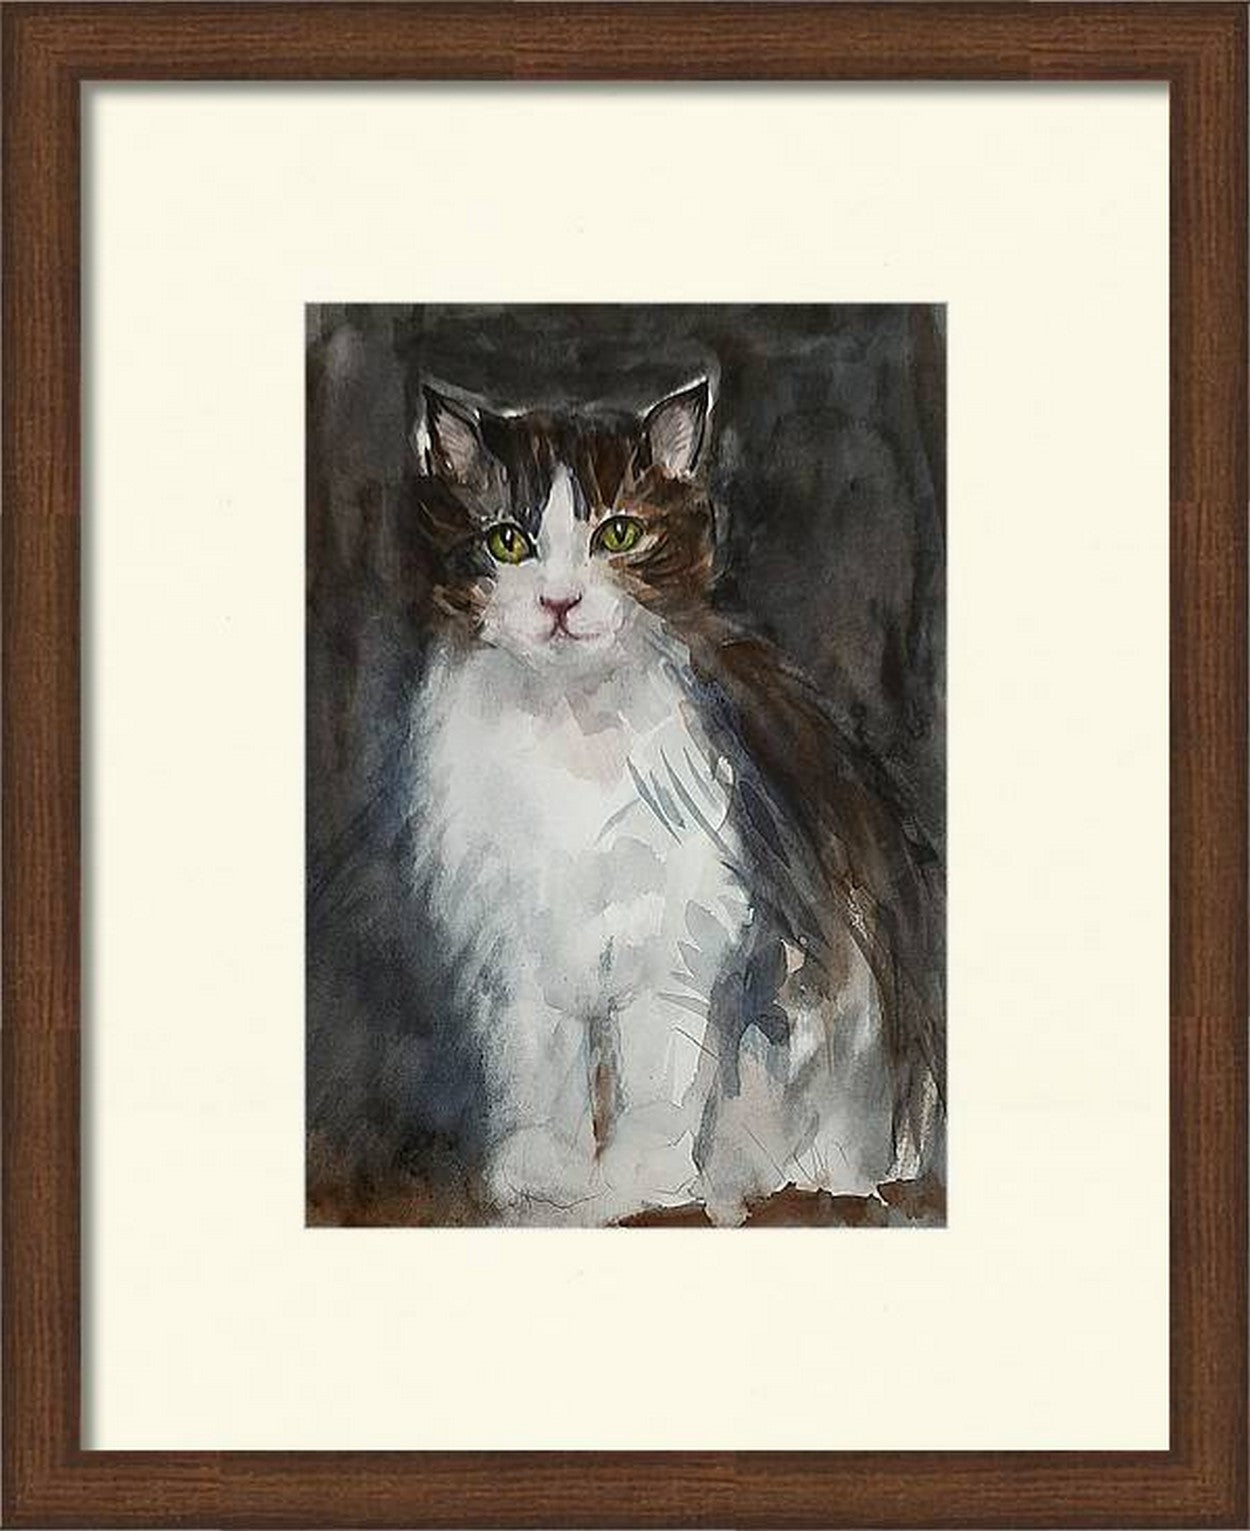 Virtual frame, The Sober Cat, watercolors on paper